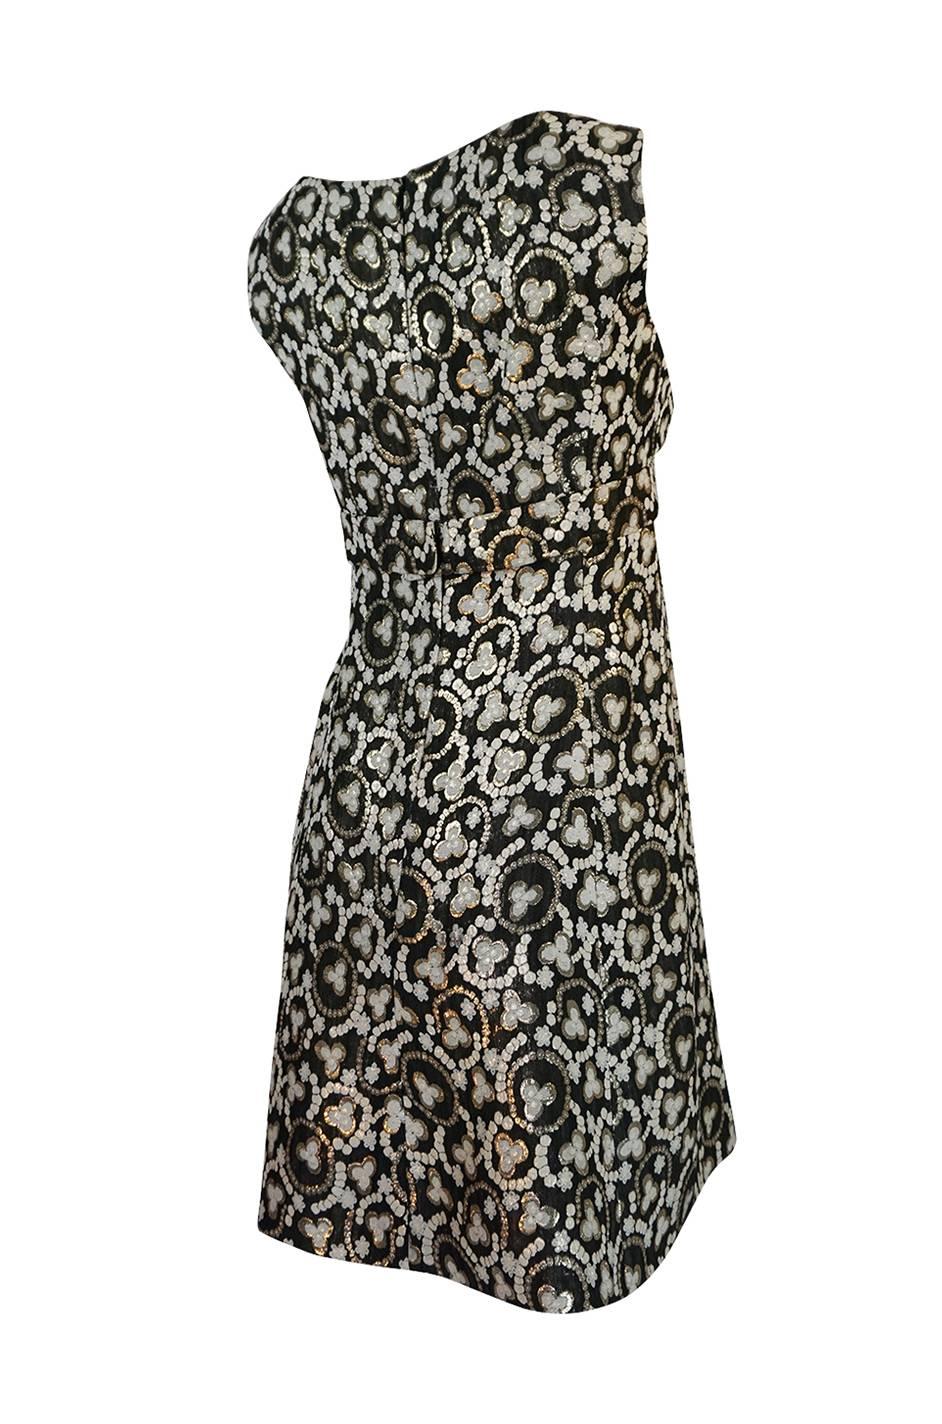 This is a gorgeous little metallic dress with a pretty print that combines a deep charcoal, gold and white. It has lost its label along the way but is a well made piece and I am guessing it had one at some point. The cut is simple and sweet with a